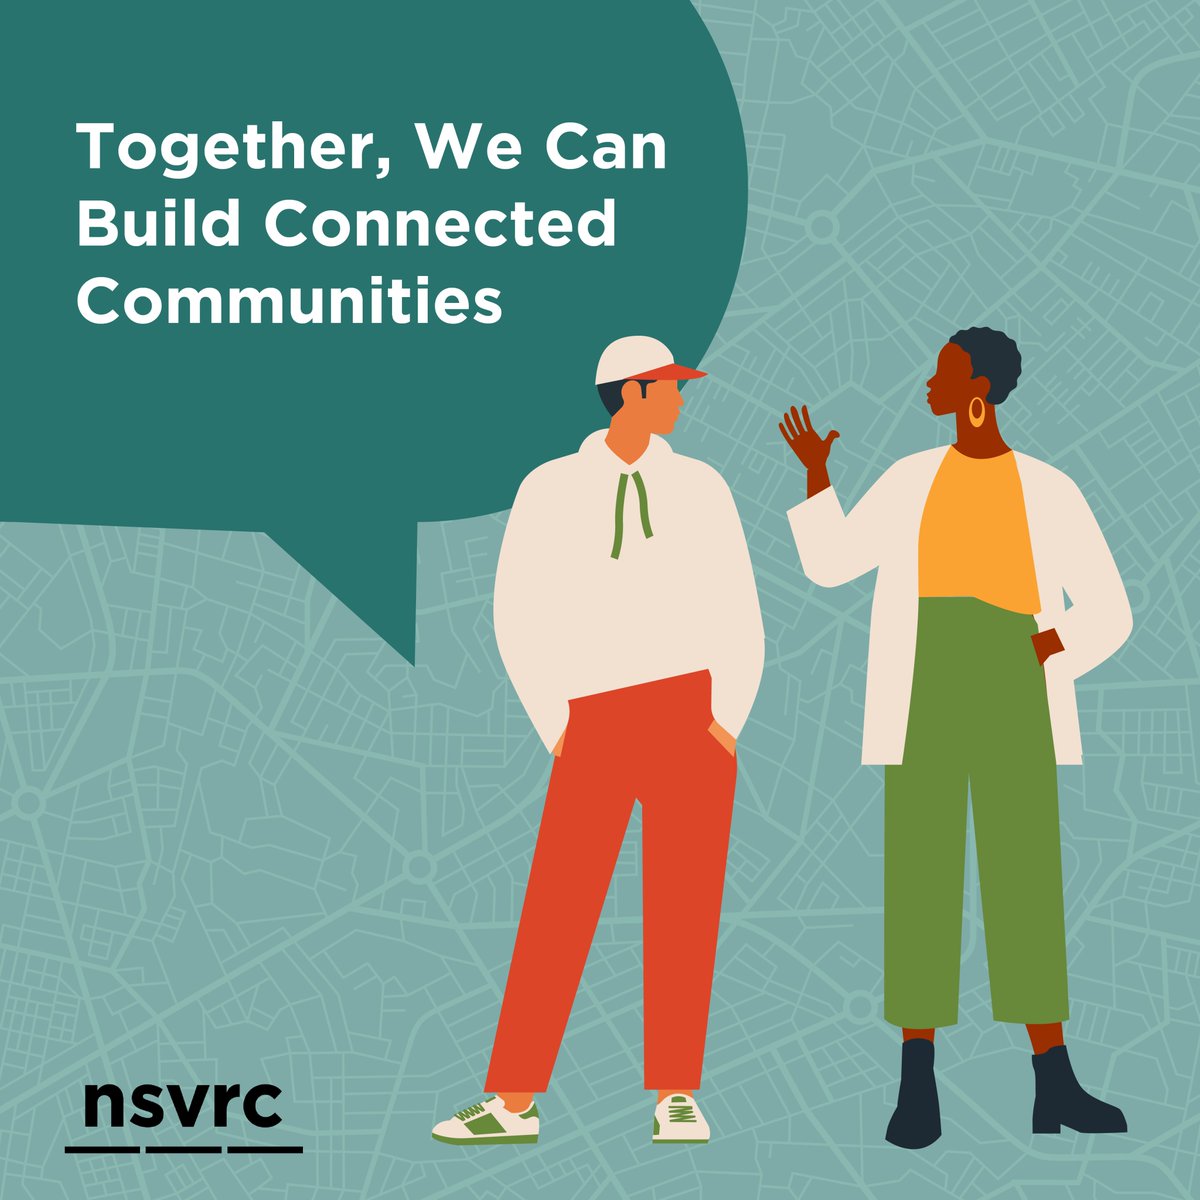 #ConnectedCommunities are safer communities bc people understand how their beliefs, choices, and actions impact one another. Together, we can build communities that help reduce the likelihood of sexual abuse, assault, and harassment, as well as all other forms of violence.